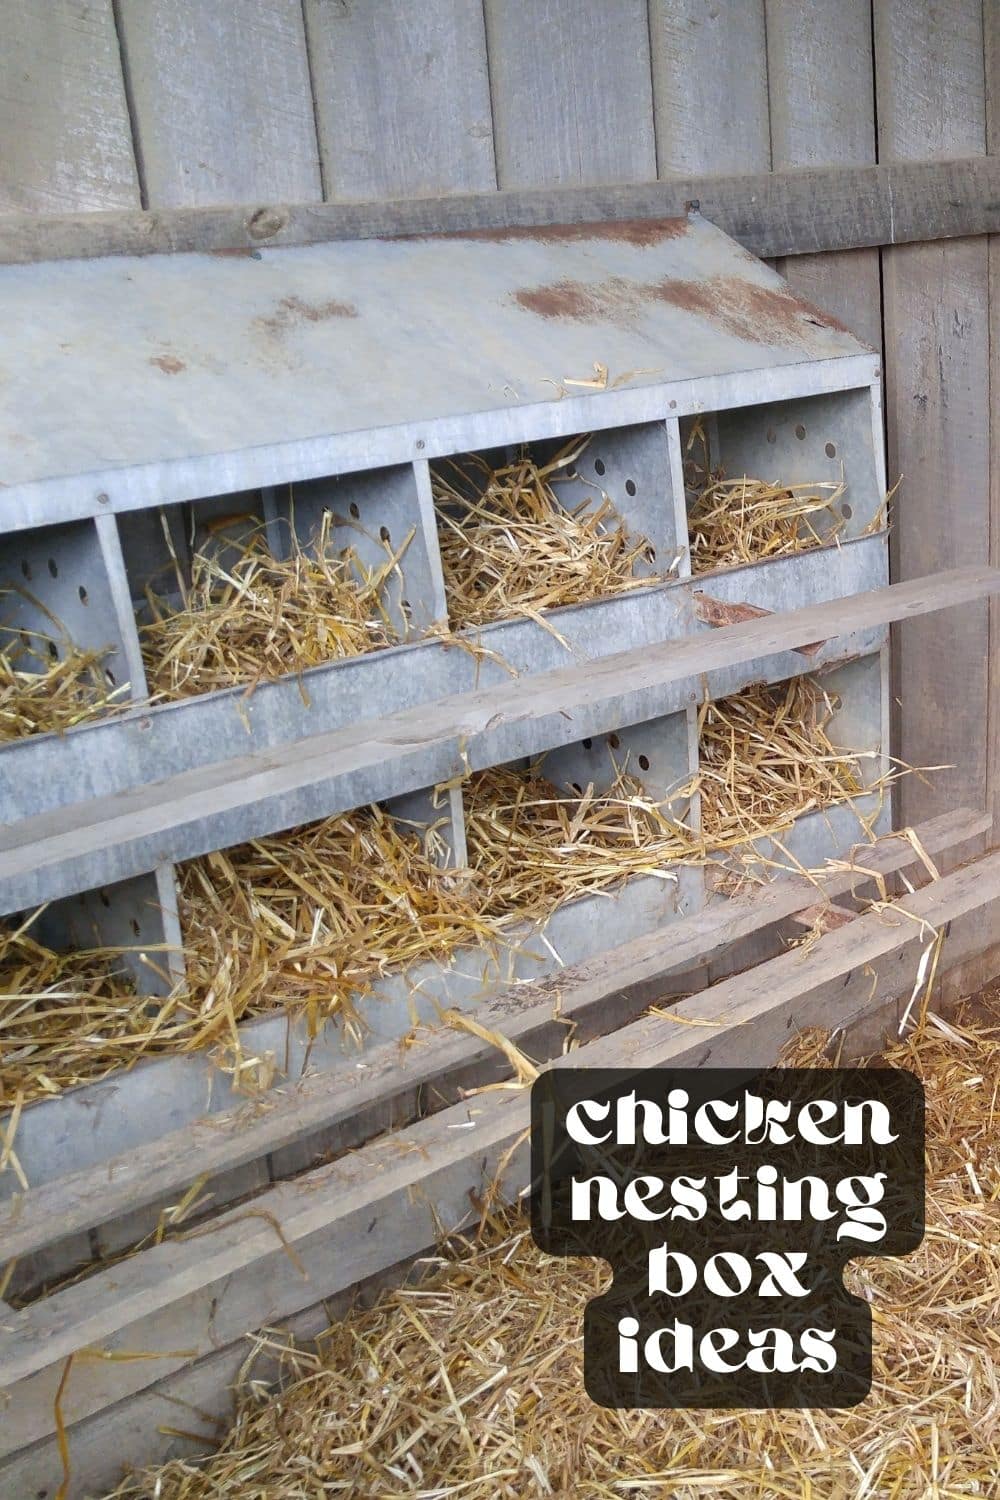 Getting your chicken coop ready for your flock doesn't have to be expensive! These nesting boxes for chickens are cheap, easy to make, and do the job perfectly. Follow my step-by-step guide to create a cozy home for your hens!